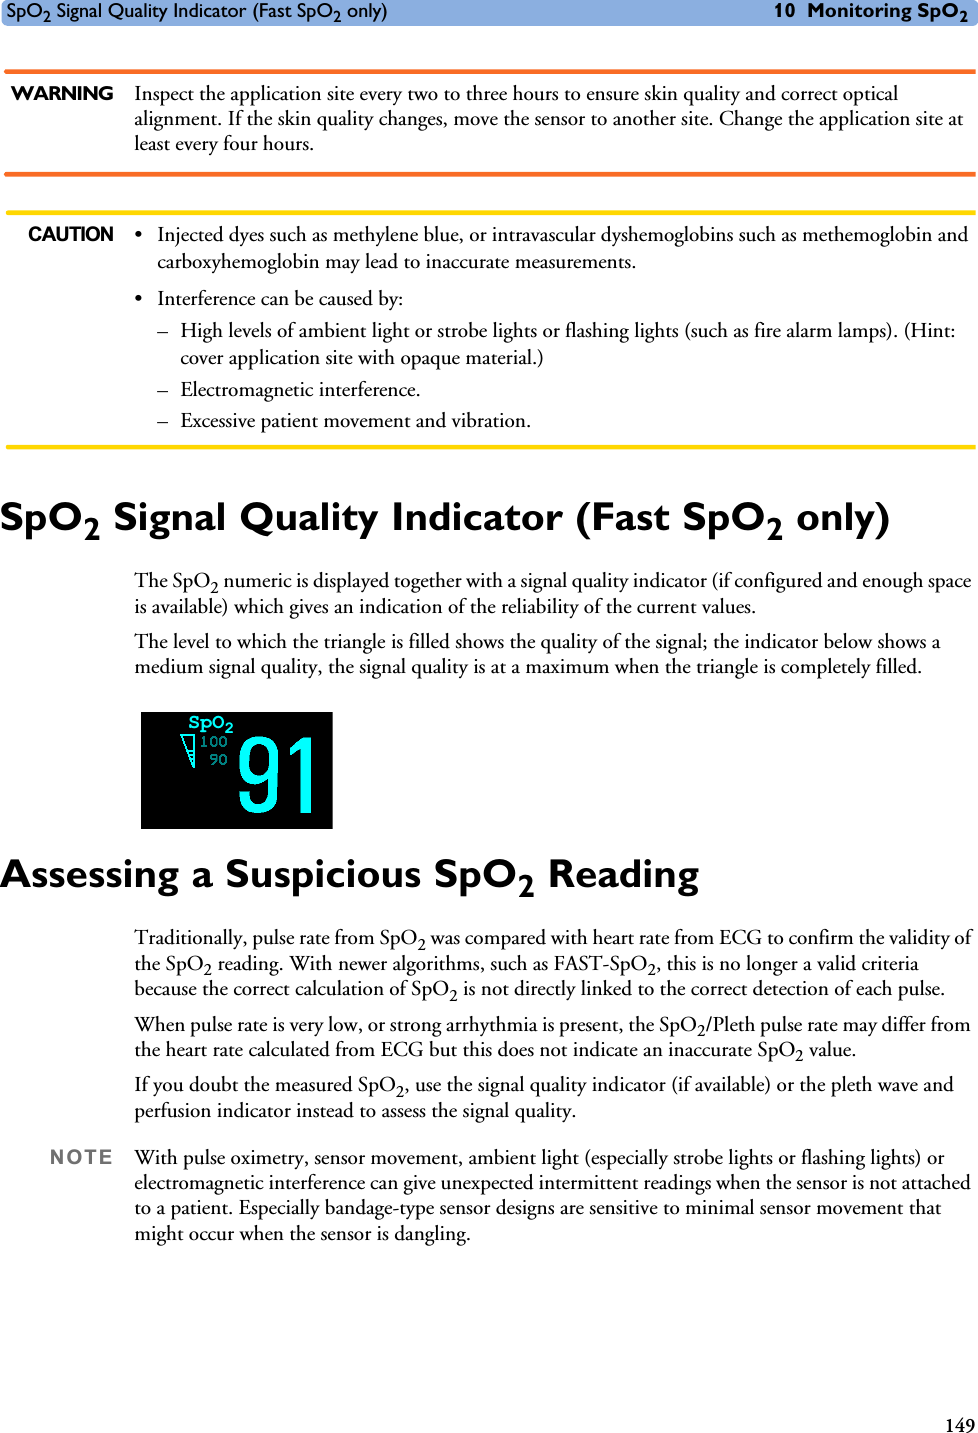 SpO2 Signal Quality Indicator (Fast SpO2 only) 10 Monitoring SpO2149WARNING Inspect the application site every two to three hours to ensure skin quality and correct optical alignment. If the skin quality changes, move the sensor to another site. Change the application site at least every four hours.CAUTION • Injected dyes such as methylene blue, or intravascular dyshemoglobins such as methemoglobin and carboxyhemoglobin may lead to inaccurate measurements.• Interference can be caused by:– High levels of ambient light or strobe lights or flashing lights (such as fire alarm lamps). (Hint: cover application site with opaque material.)– Electromagnetic interference.– Excessive patient movement and vibration.SpO2 Signal Quality Indicator (Fast SpO2 only)The SpO2 numeric is displayed together with a signal quality indicator (if configured and enough space is available) which gives an indication of the reliability of the current values. The level to which the triangle is filled shows the quality of the signal; the indicator below shows a medium signal quality, the signal quality is at a maximum when the triangle is completely filled.Assessing a Suspicious SpO2 ReadingTraditionally, pulse rate from SpO2 was compared with heart rate from ECG to confirm the validity of the SpO2 reading. With newer algorithms, such as FAST-SpO2, this is no longer a valid criteria because the correct calculation of SpO2 is not directly linked to the correct detection of each pulse. When pulse rate is very low, or strong arrhythmia is present, the SpO2/Pleth pulse rate may differ from the heart rate calculated from ECG but this does not indicate an inaccurate SpO2 value.If you doubt the measured SpO2, use the signal quality indicator (if available) or the pleth wave and perfusion indicator instead to assess the signal quality.NOTE With pulse oximetry, sensor movement, ambient light (especially strobe lights or flashing lights) or electromagnetic interference can give unexpected intermittent readings when the sensor is not attached to a patient. Especially bandage-type sensor designs are sensitive to minimal sensor movement that might occur when the sensor is dangling. SpO2